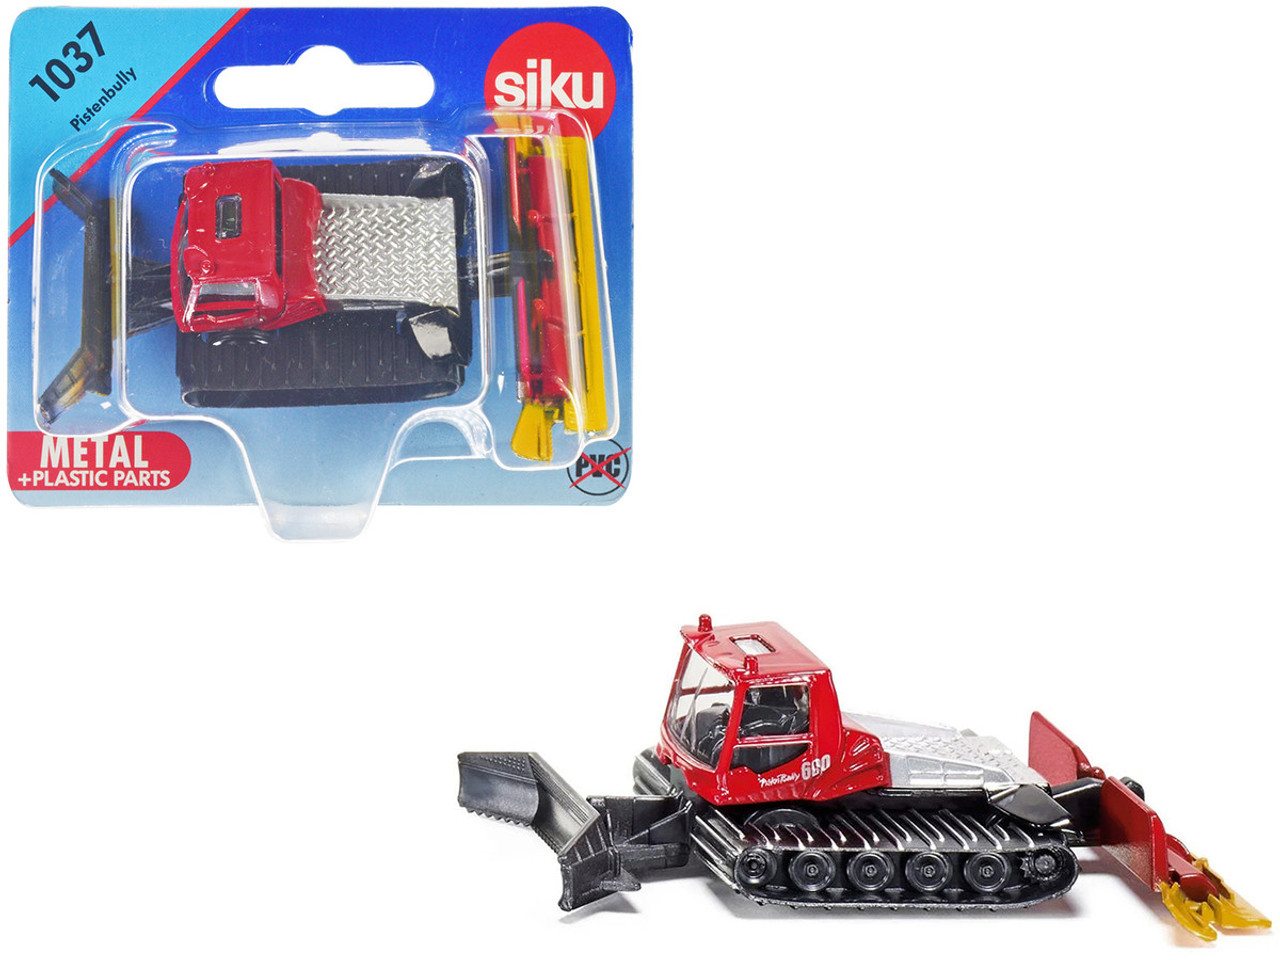 Pistenbully 600 Snow Groomer Red and Black Diecast Model by Siku